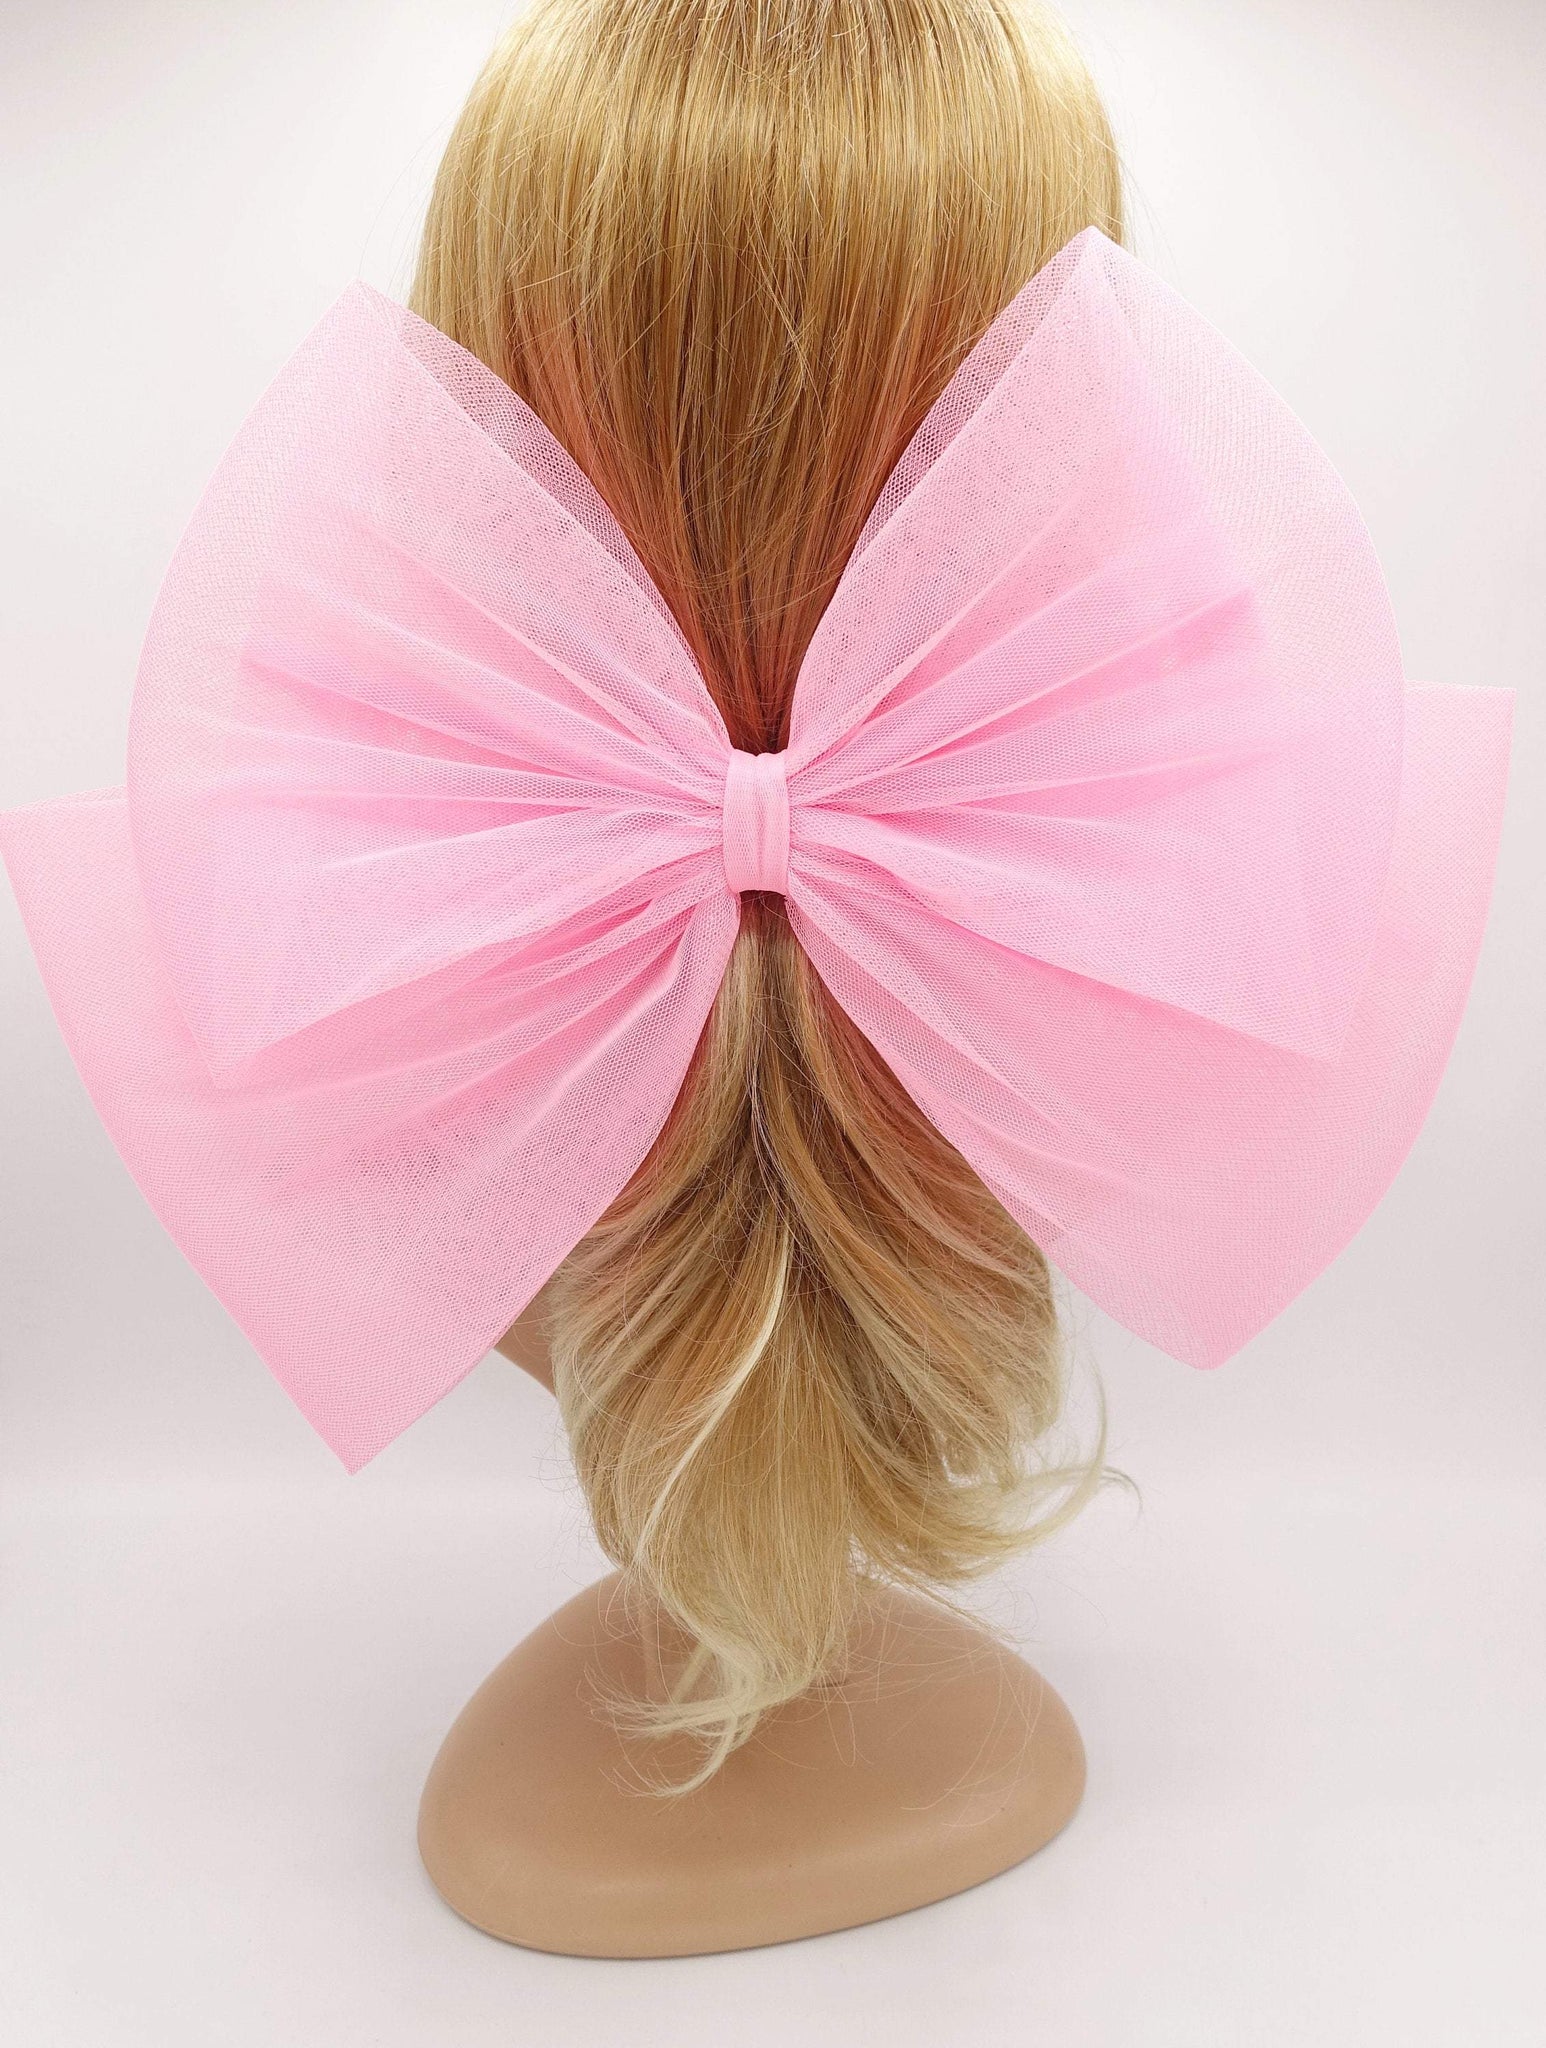 VeryShine claw/banana/barrette Pink Jumbo bow event cosplay hair accessory for women